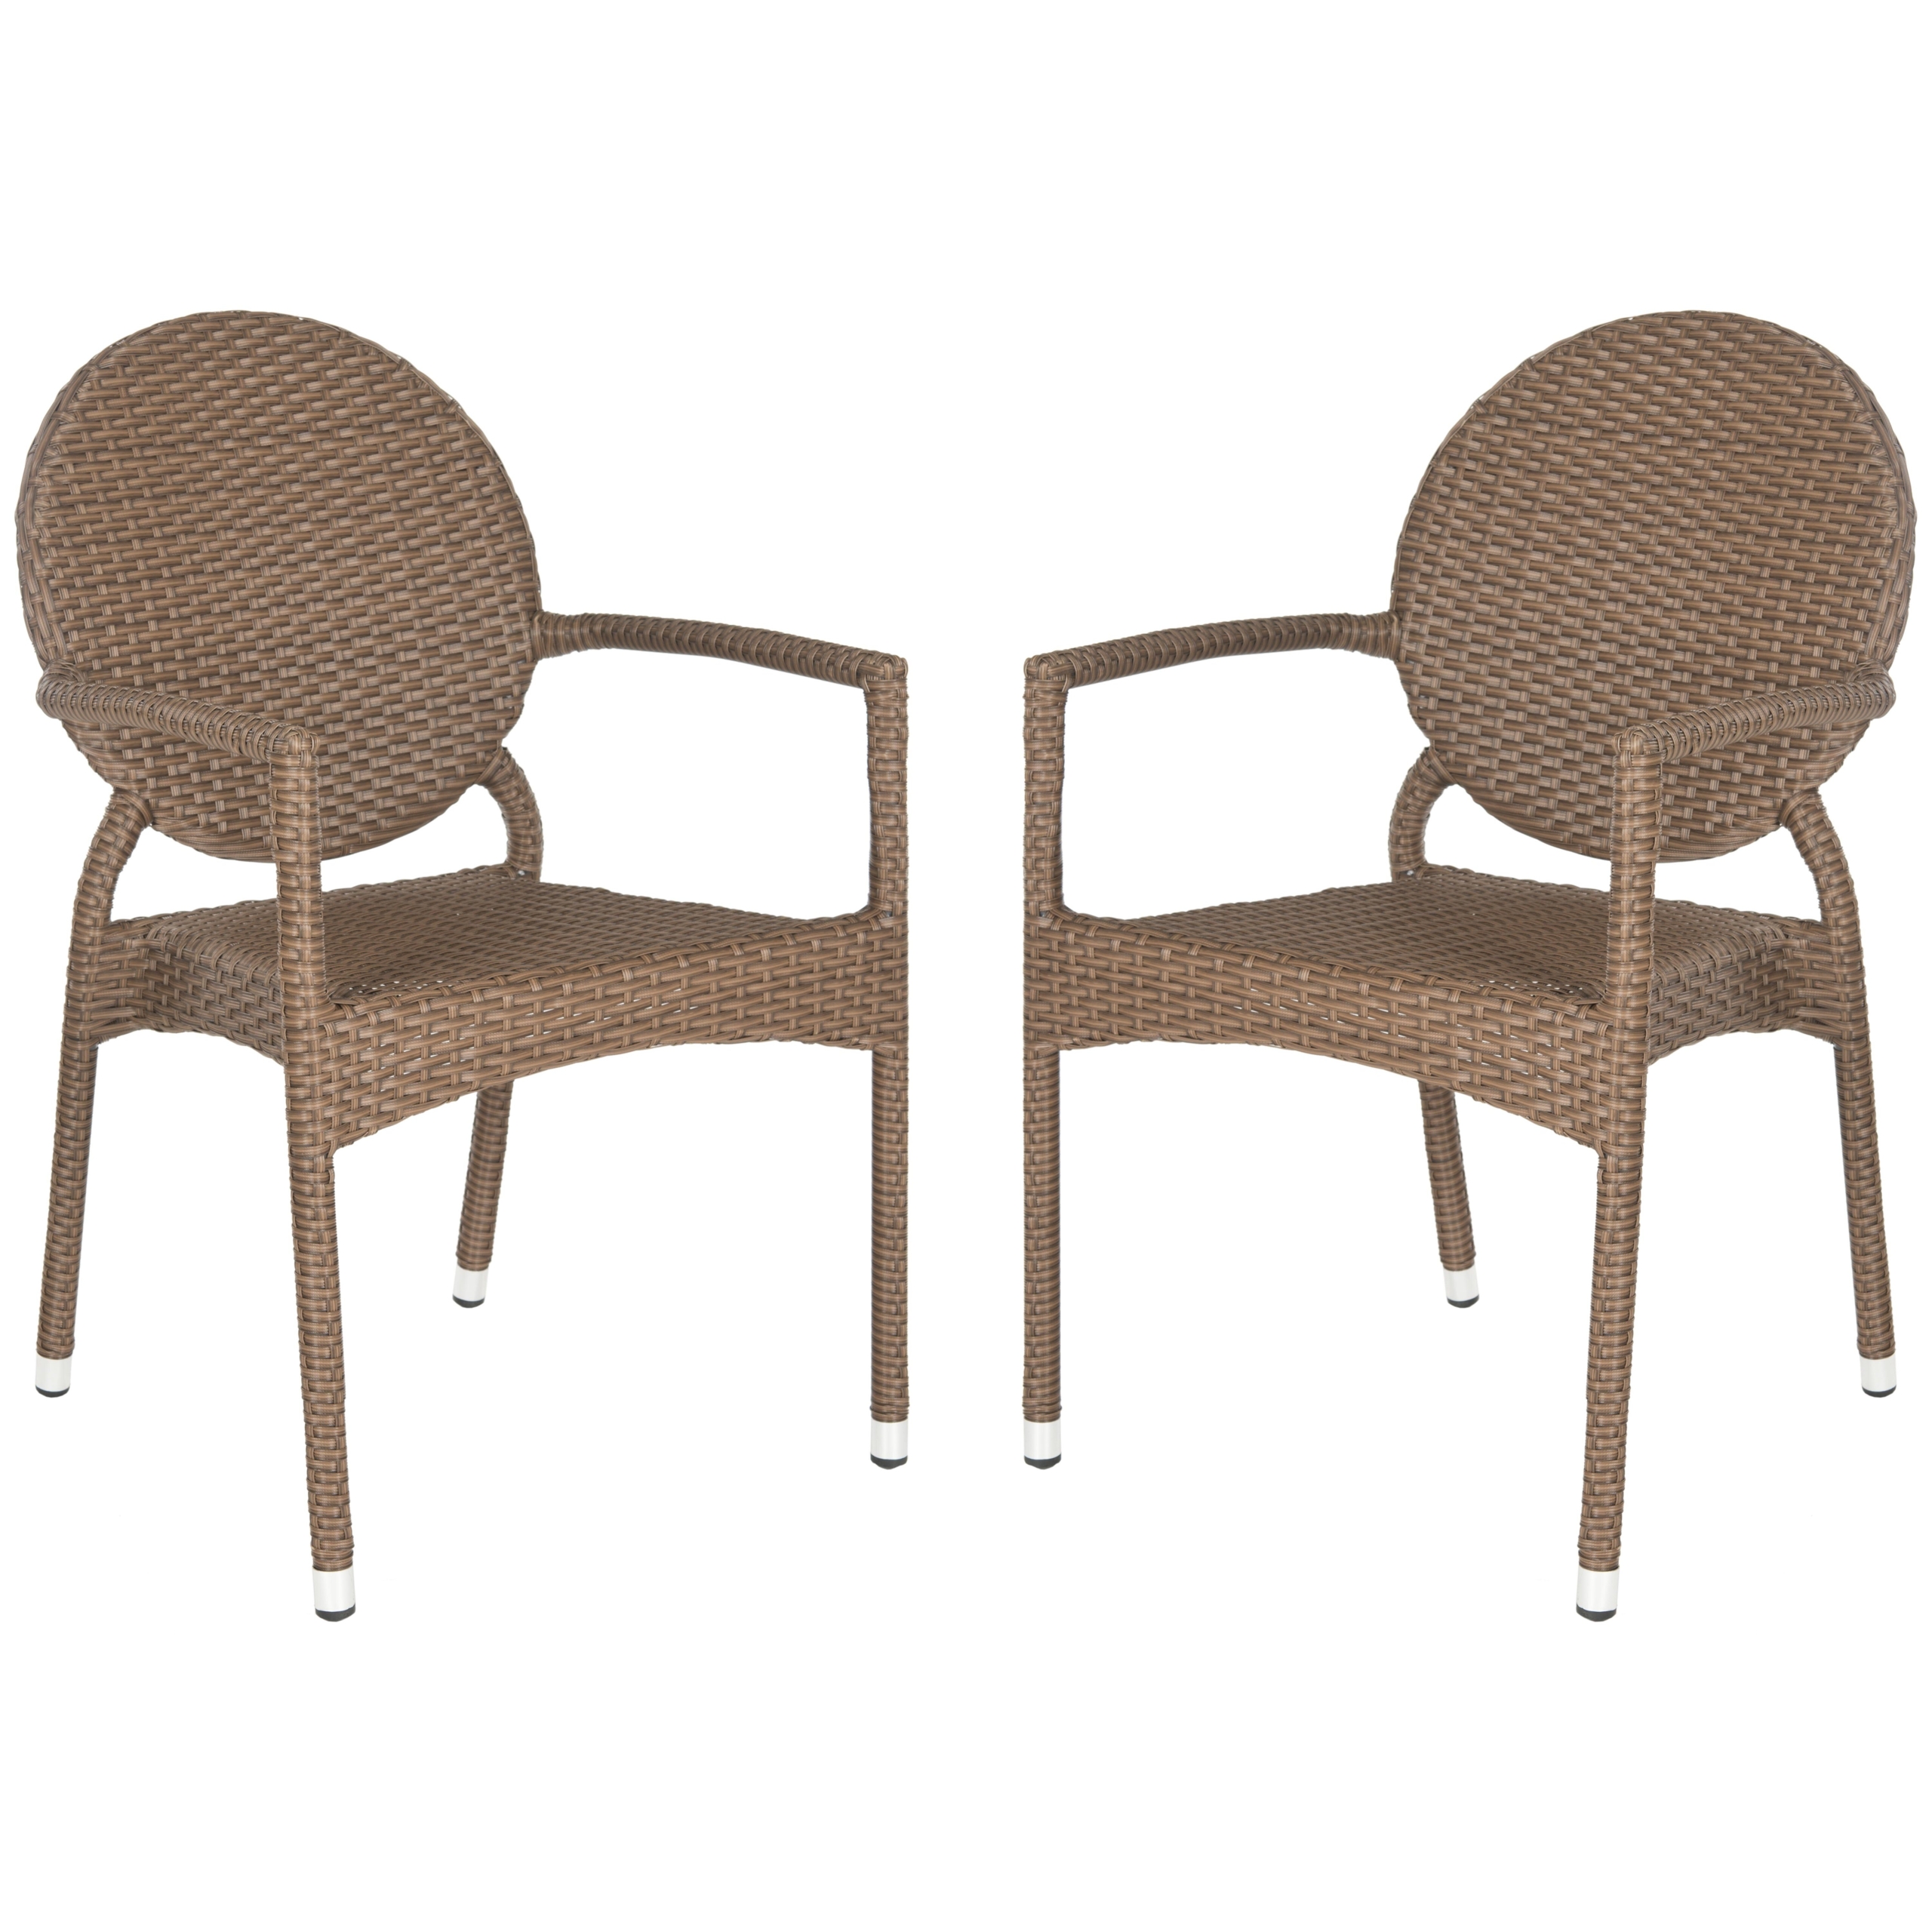 Wicker stacking arm chairs 9